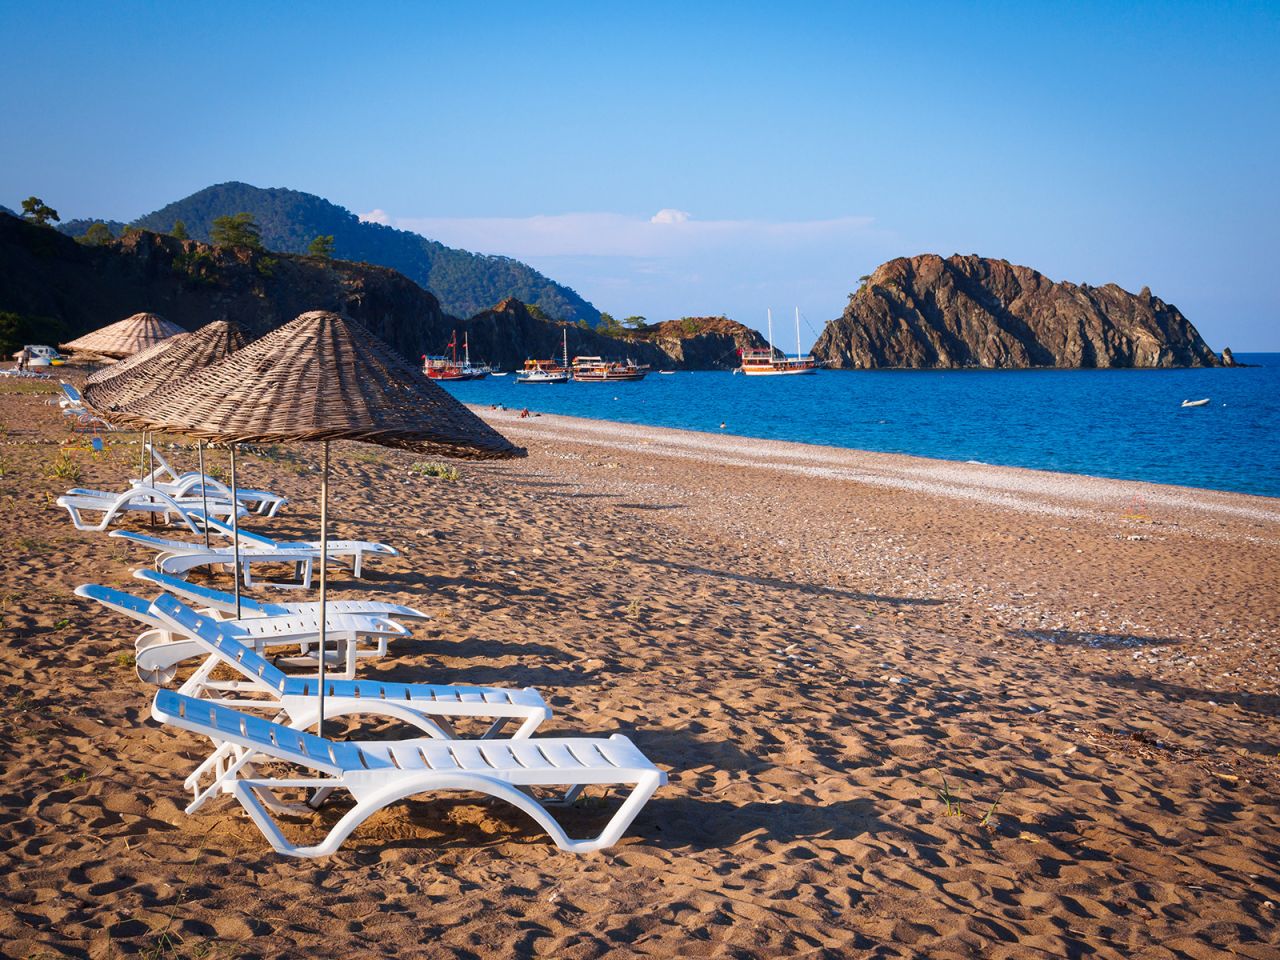 <strong>Çıralı:</strong> The beach at Çıralı is known for its laid back vibe.